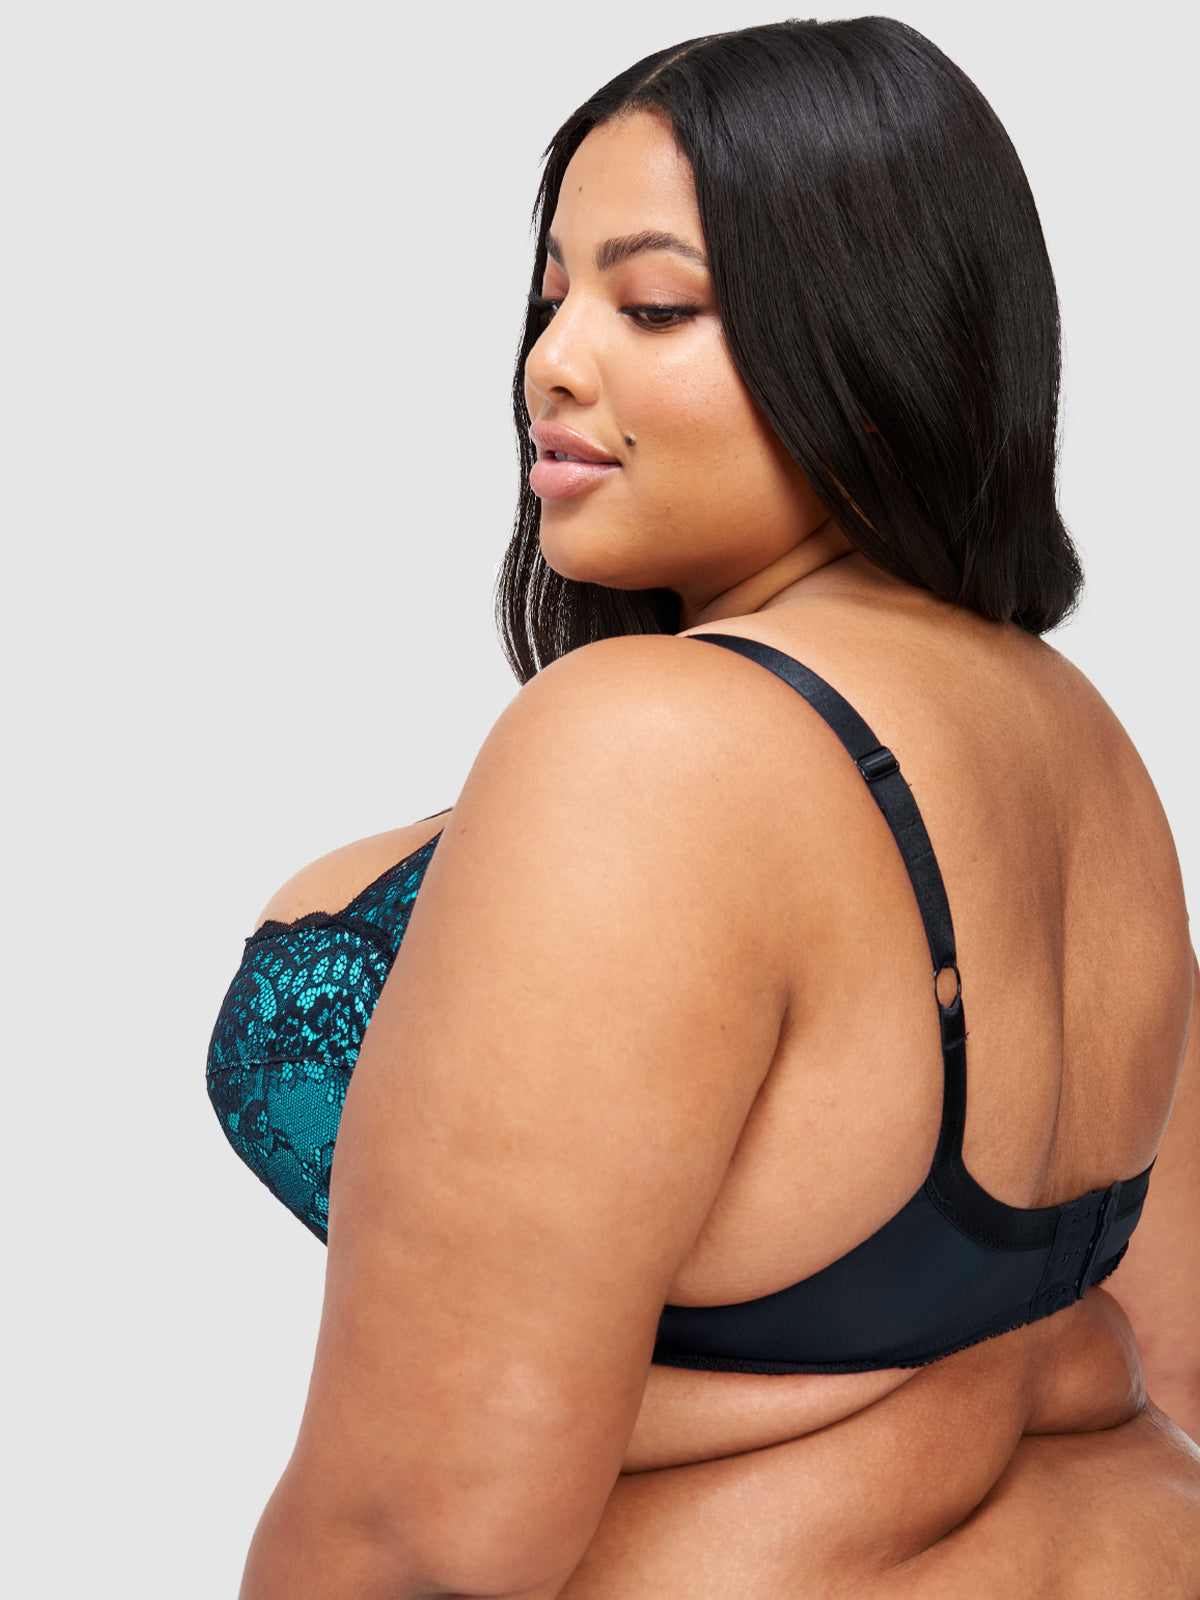 Large Busted Bras to Fit Women with Full Busted Silhouettes